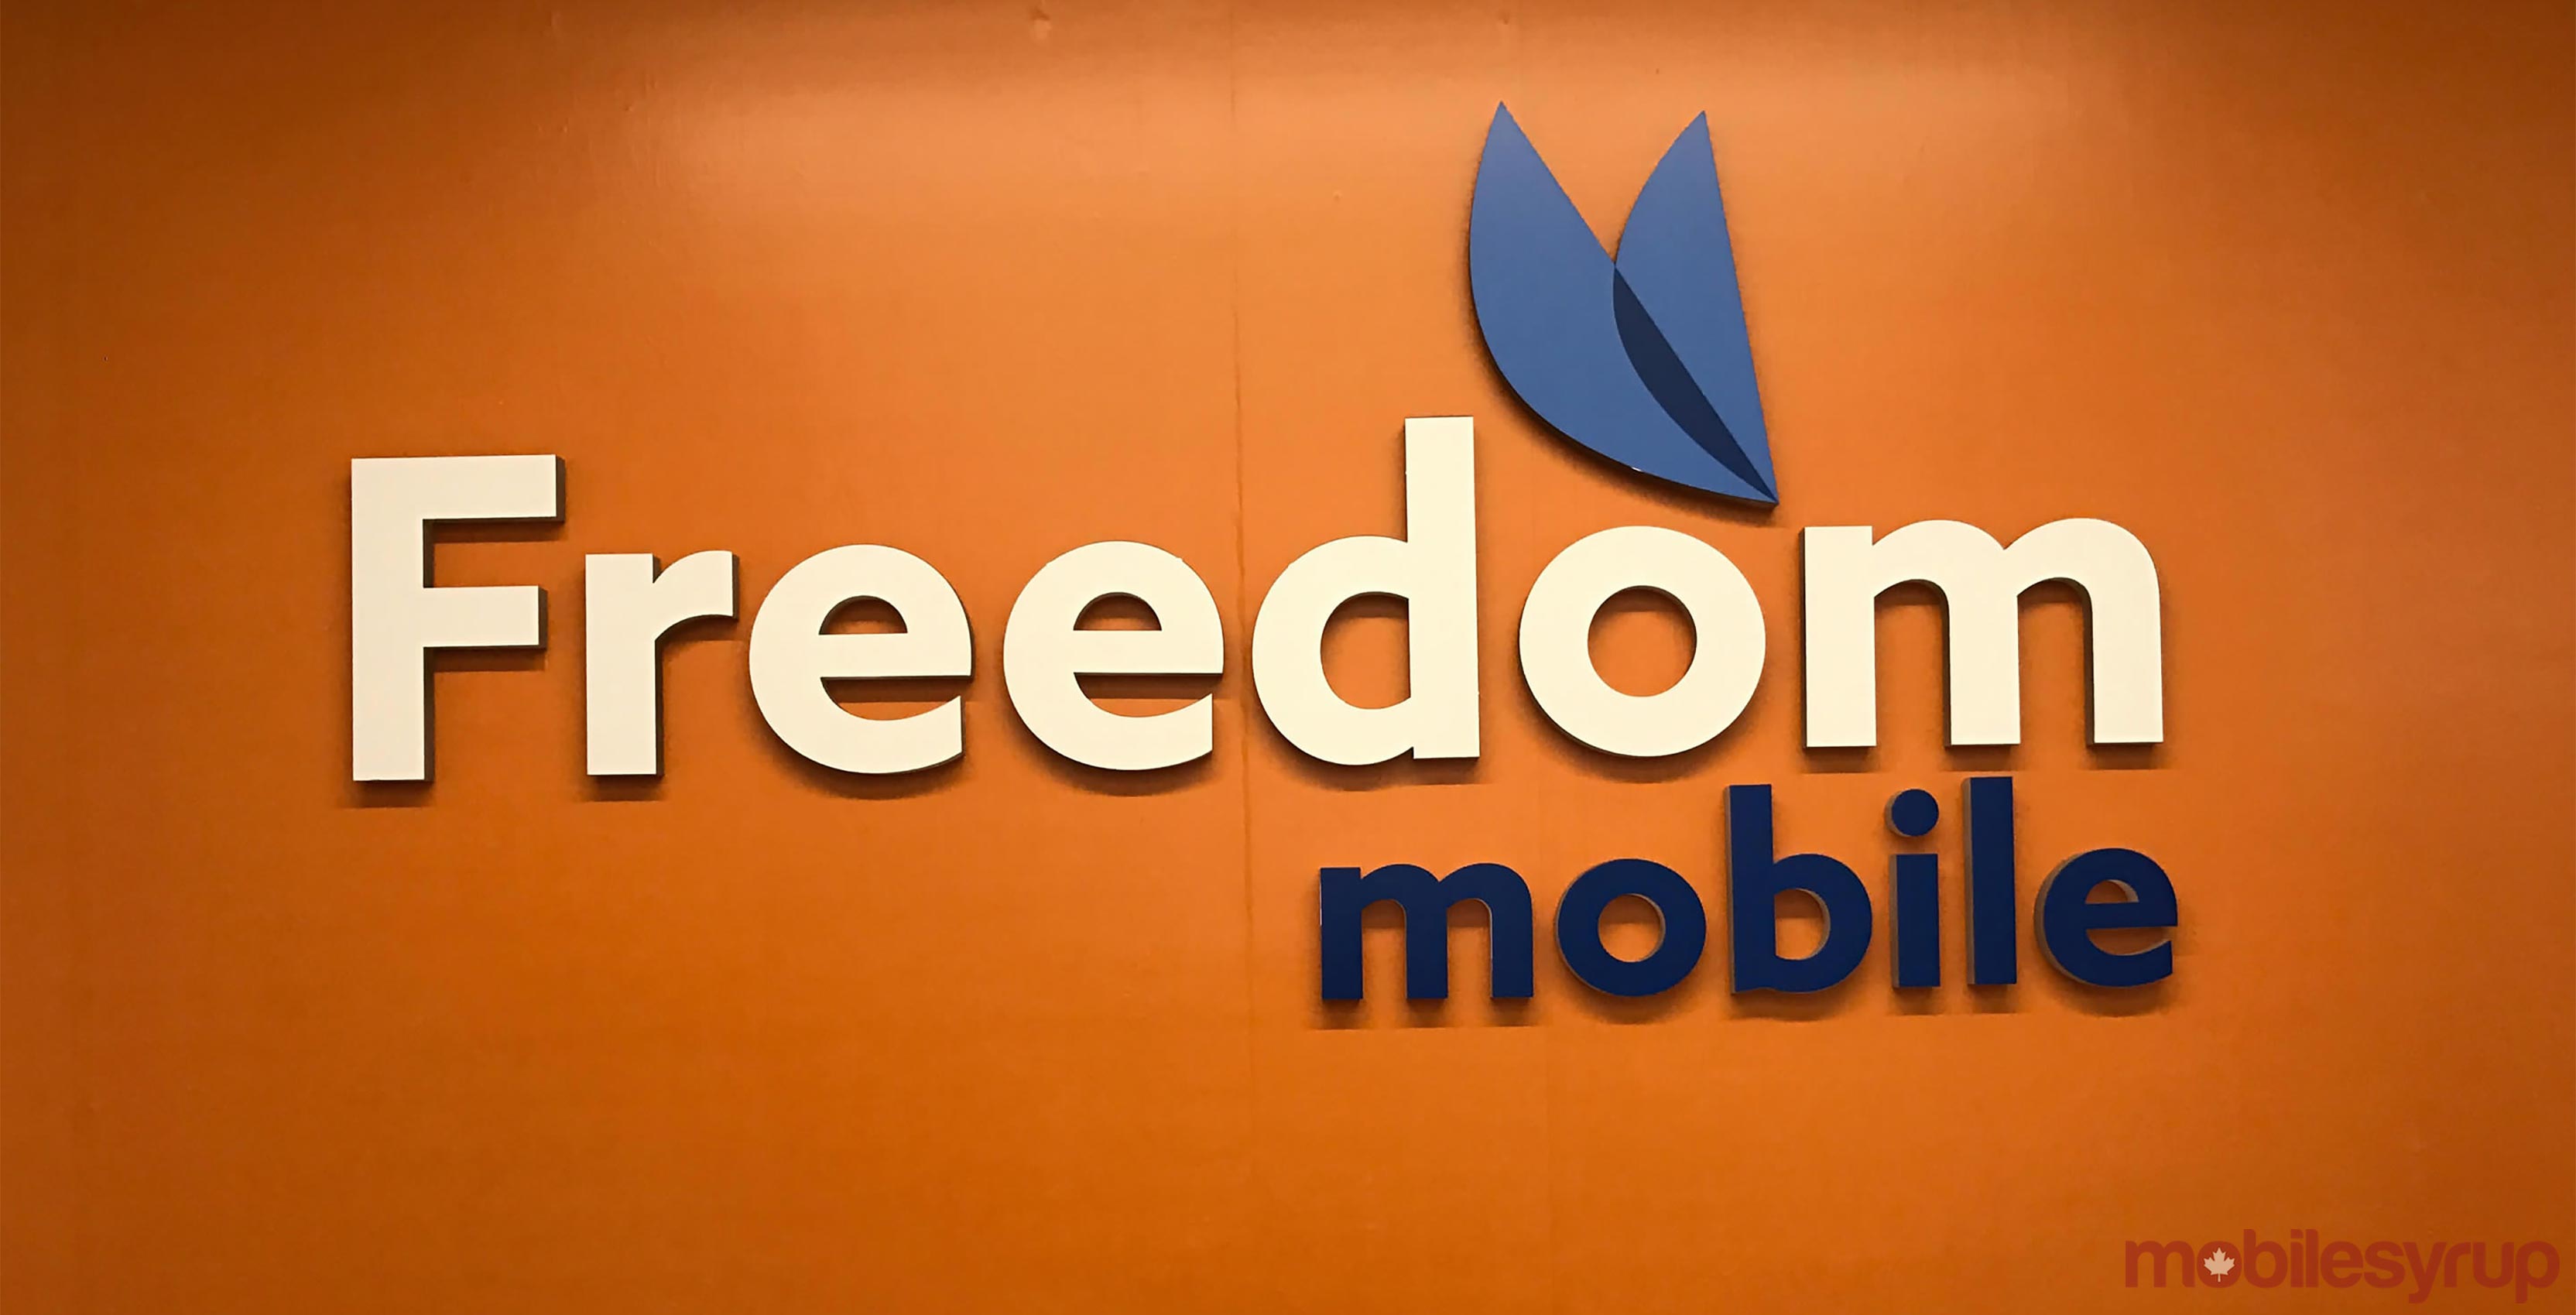 Freedom Mobile's network is expanding to cover Chilliwack, British